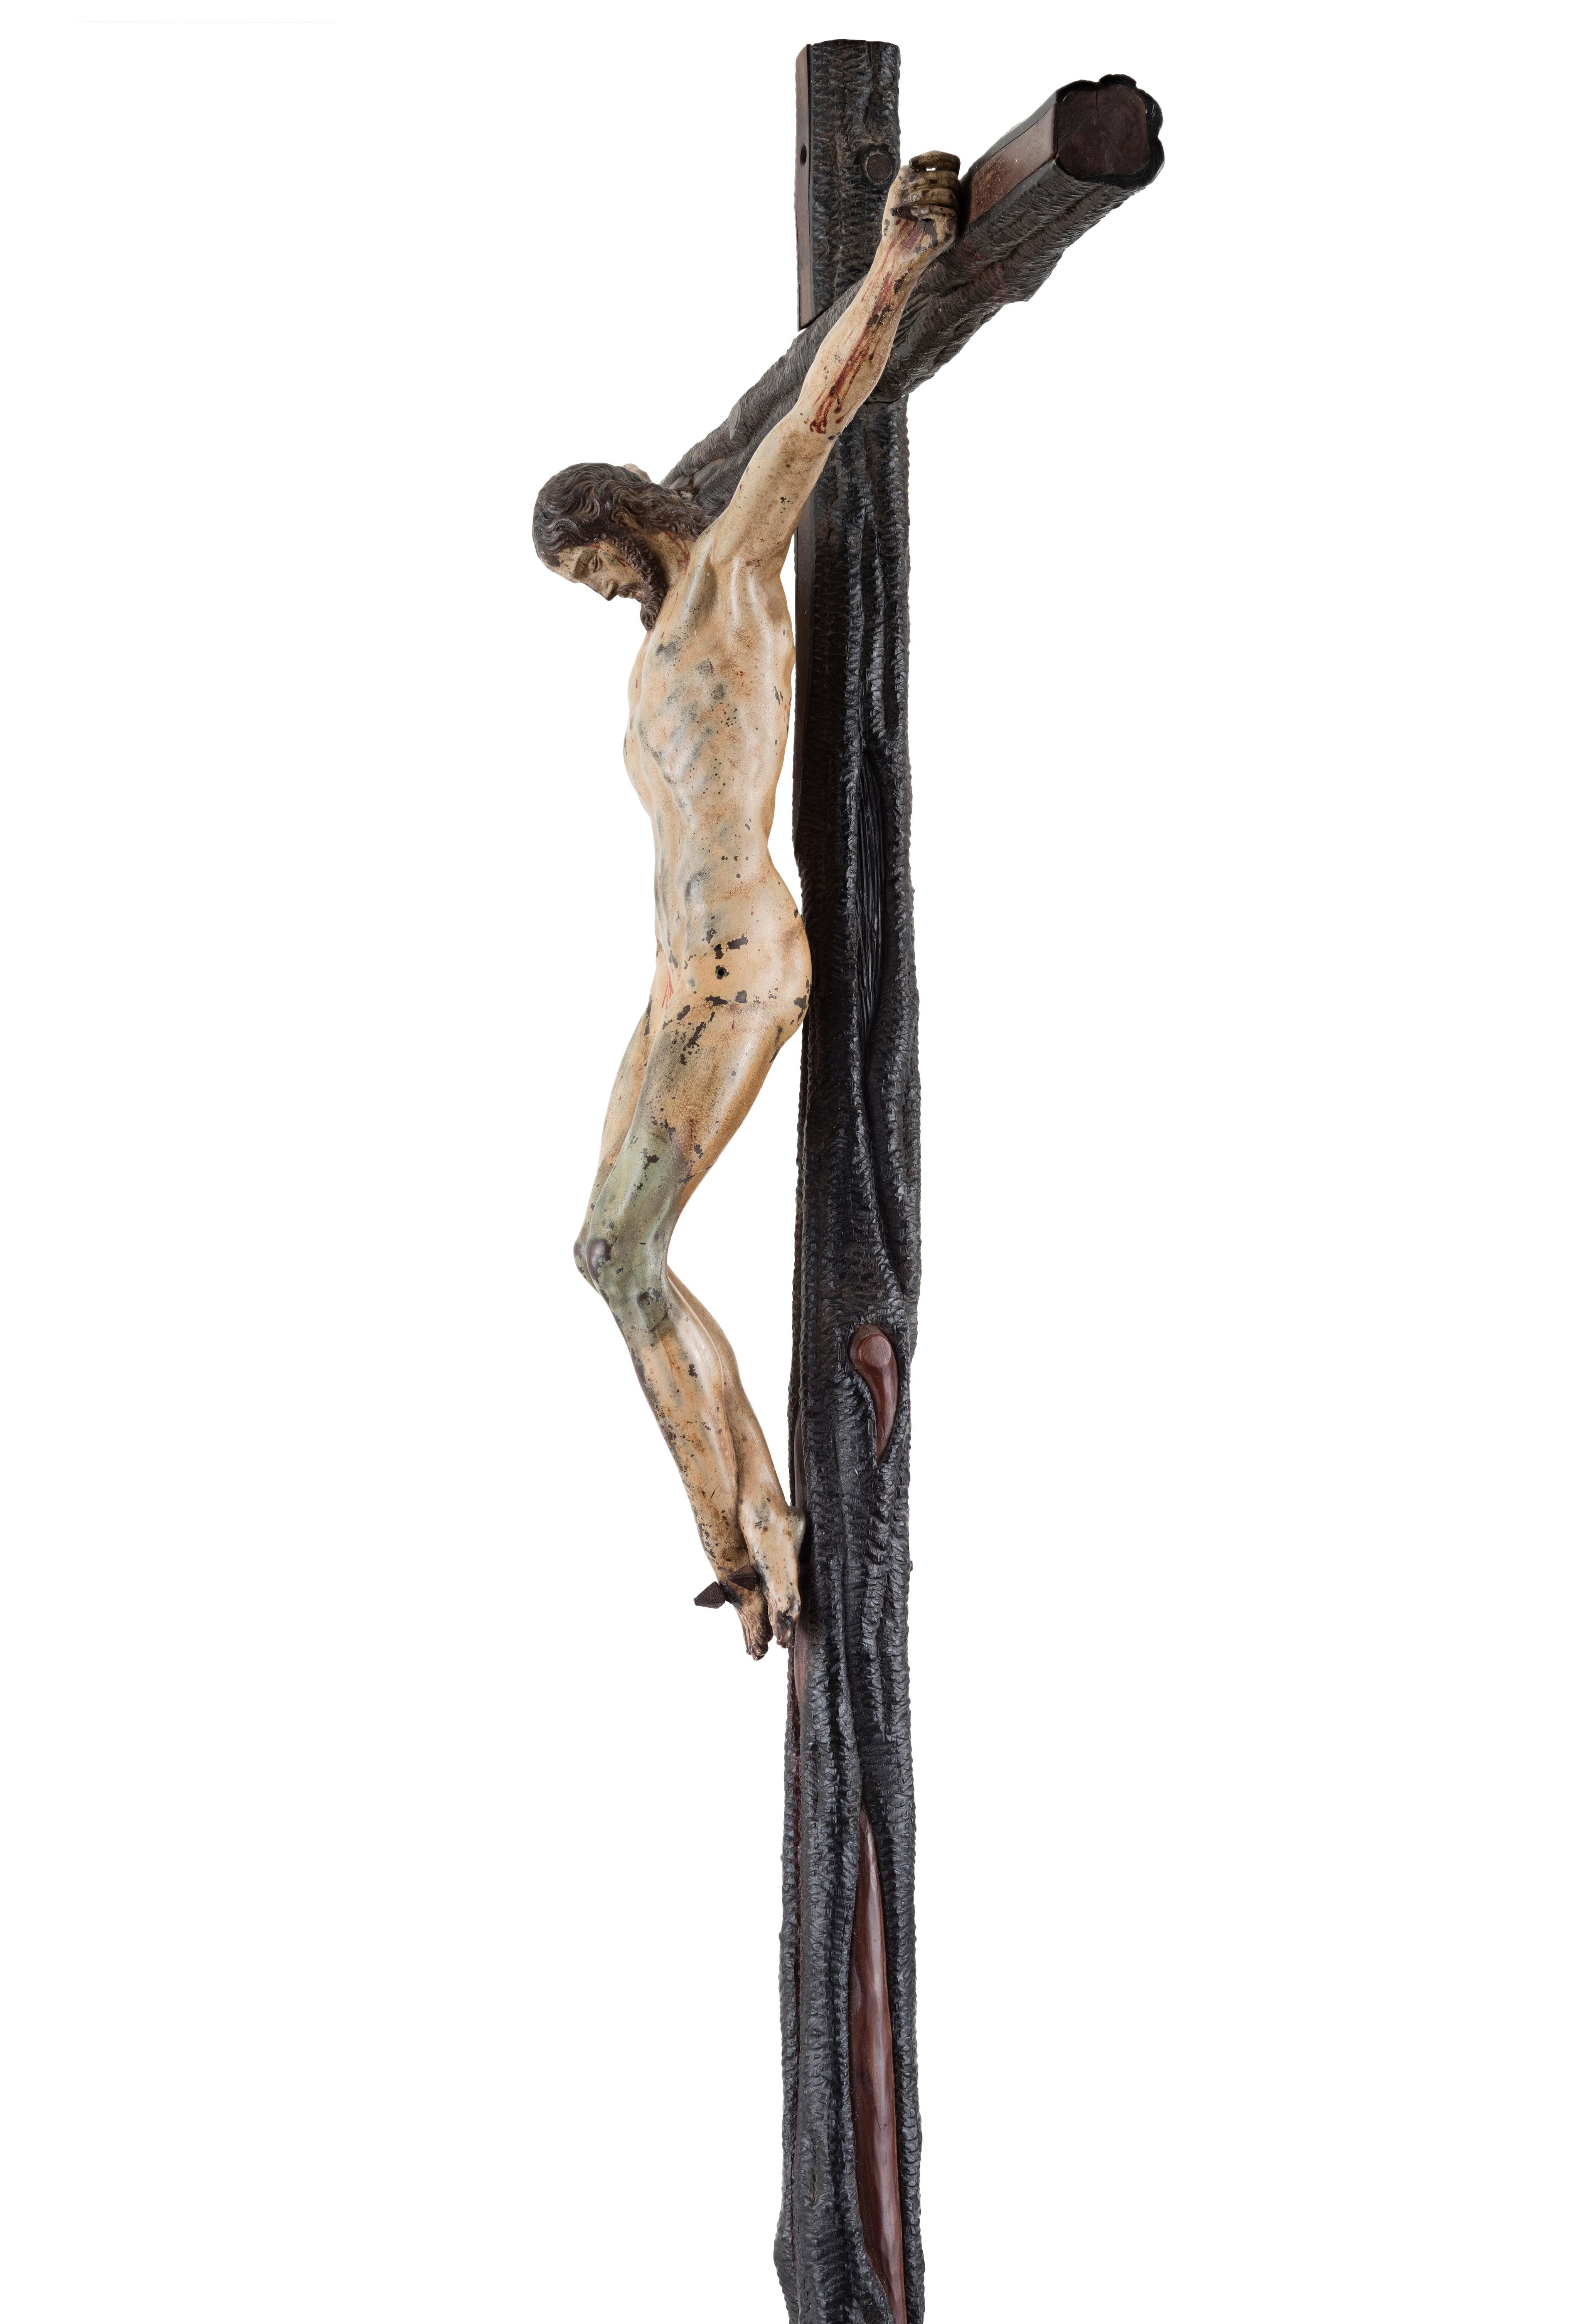 A rare and very fine bronze corpus of Christ after a model by Michelangelo, cast ca. 1597-1600 by Juan Bautista Franconio and painted in 1600 by Francisco Pacheco in Seville, Spain.

The present corpus reproduces a model attributed to Michelangelo.